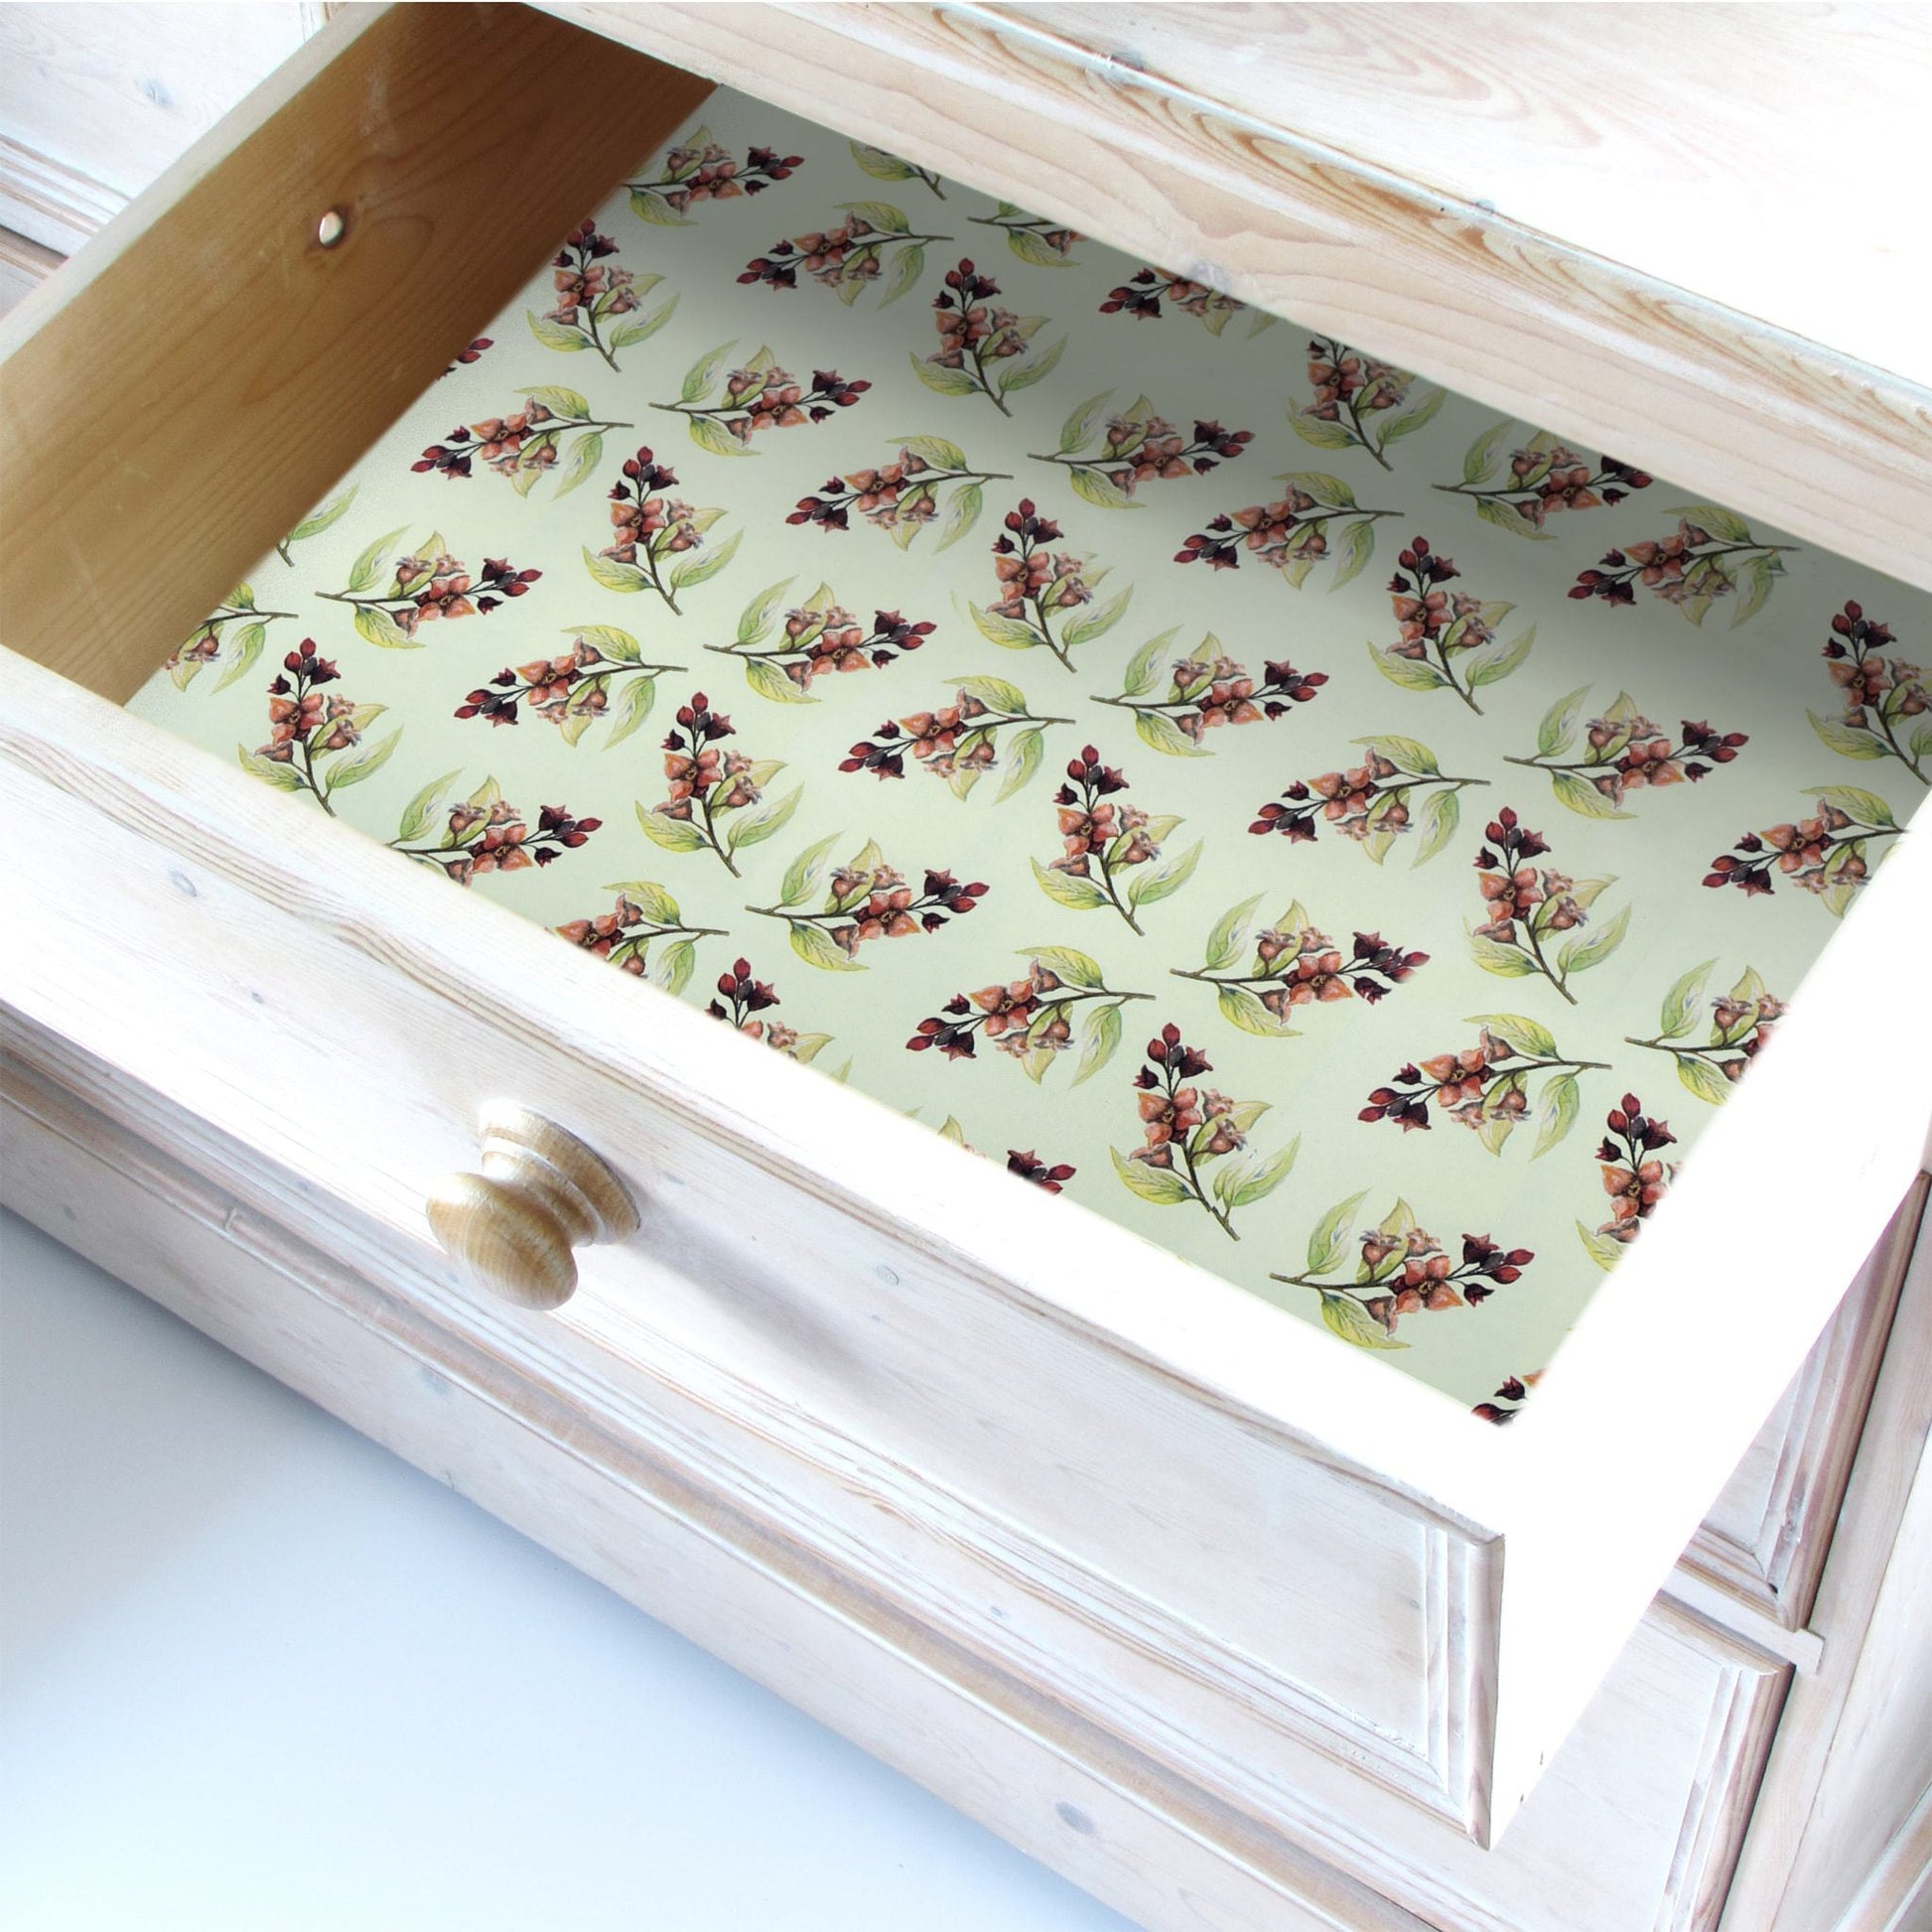 THE MASTER HERBALIST SANDALWOOD Fragrance SCENTED Drawer Liners in a SANDALWOOD pattern. Made in Britain.